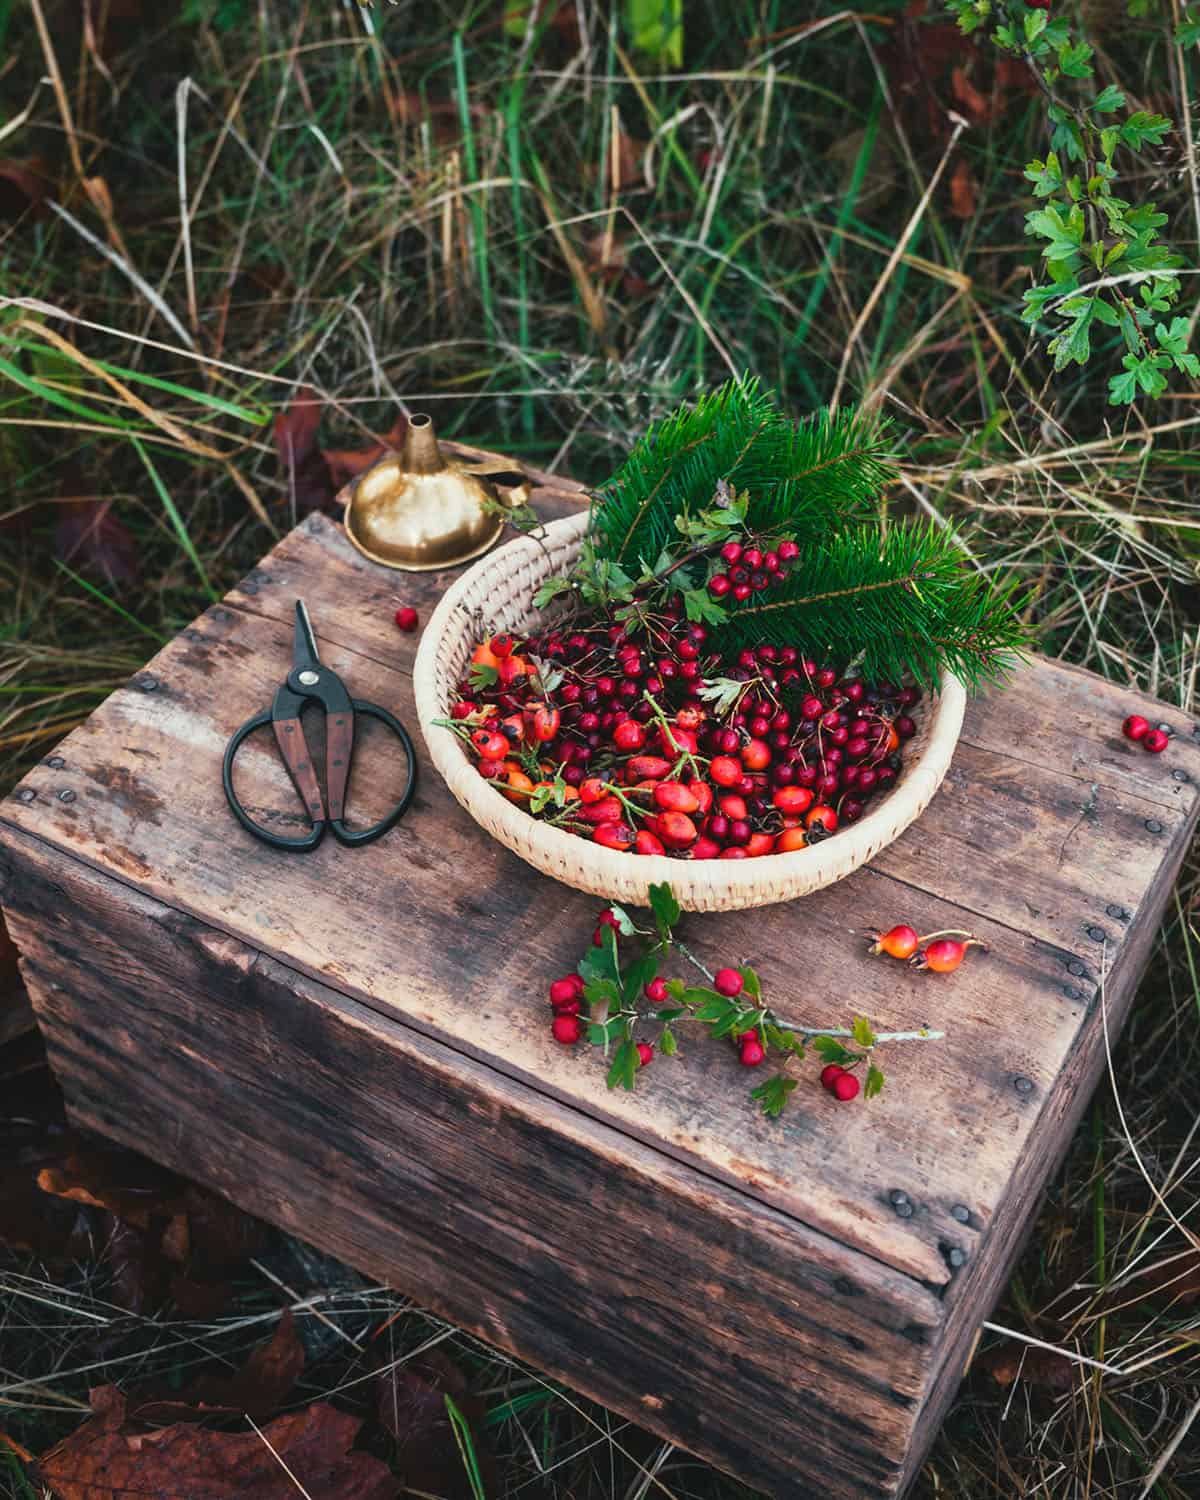 A natural wood cutting board with foraged ingredients for infused vinegar in a bowl and surrounding, including hawthorn berries, rose hips, and conifer needles. 